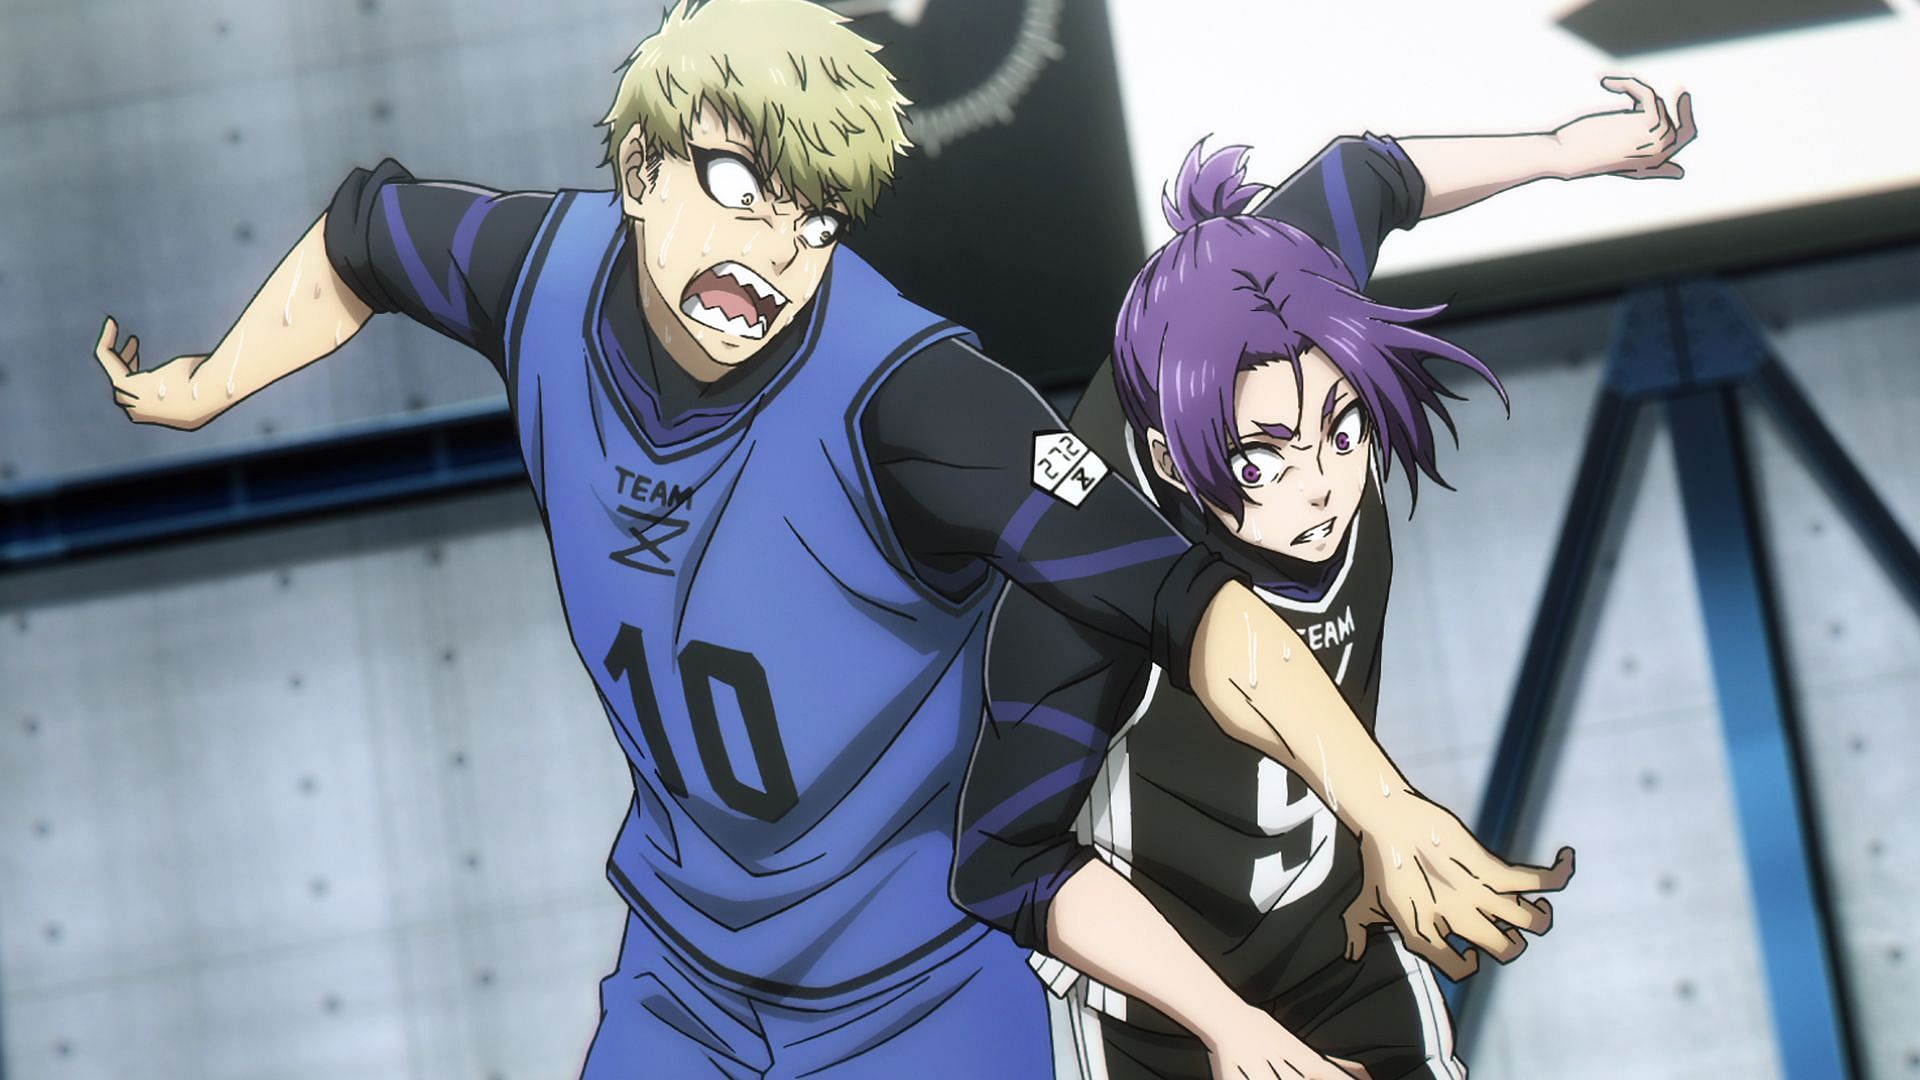 Raichi and Reo as seen in the episode 9 preview (image via 8bit)